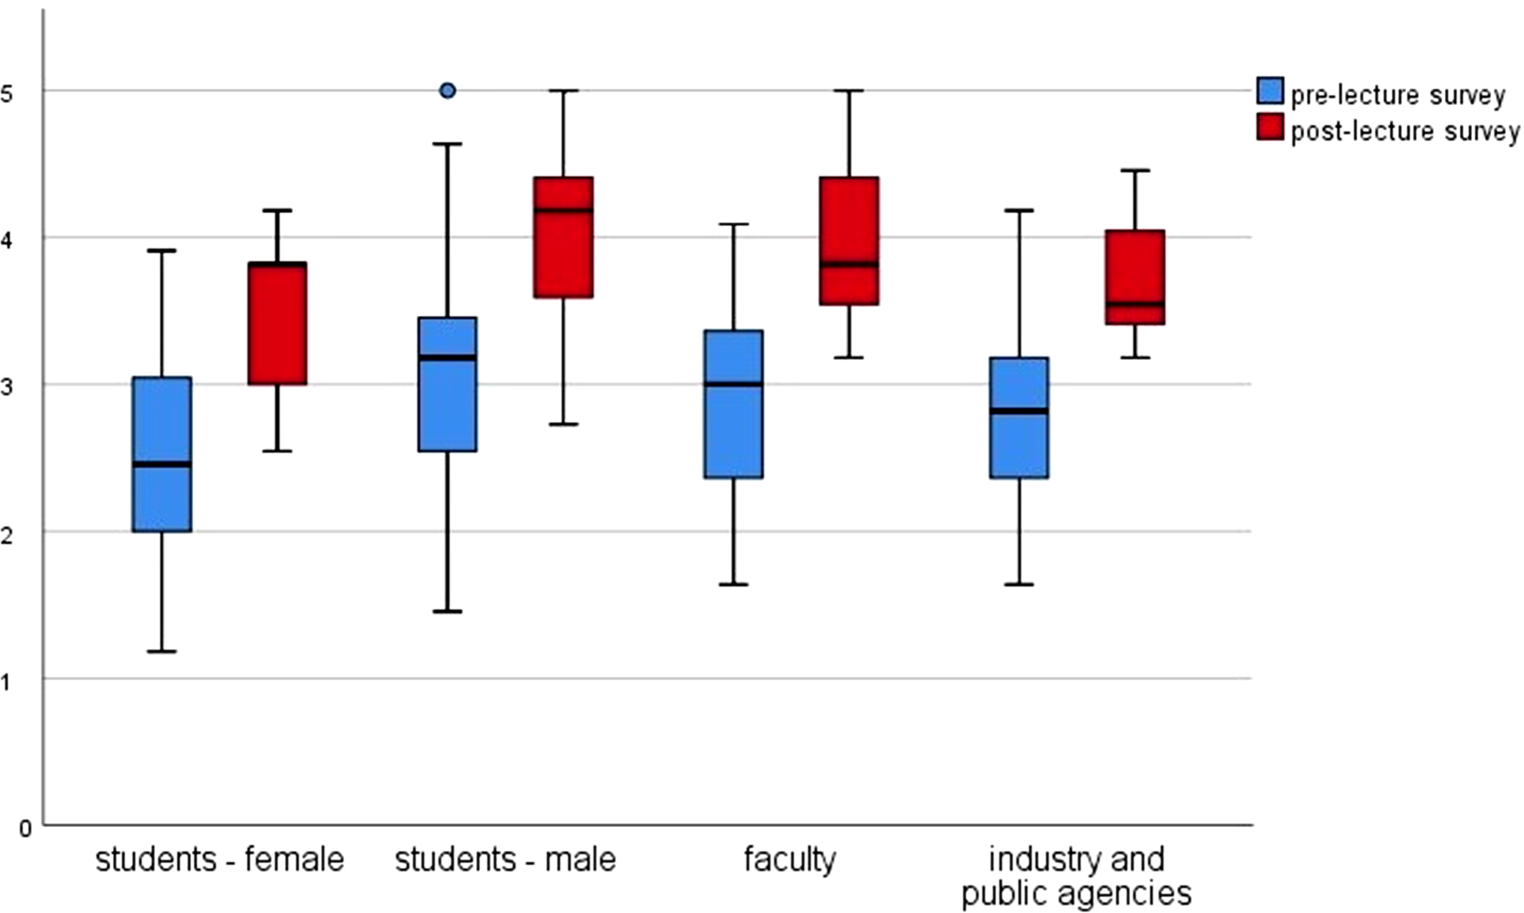 Analysis of the impact of a university distance learning course on digitalization in medicine on students and healthcare professionals